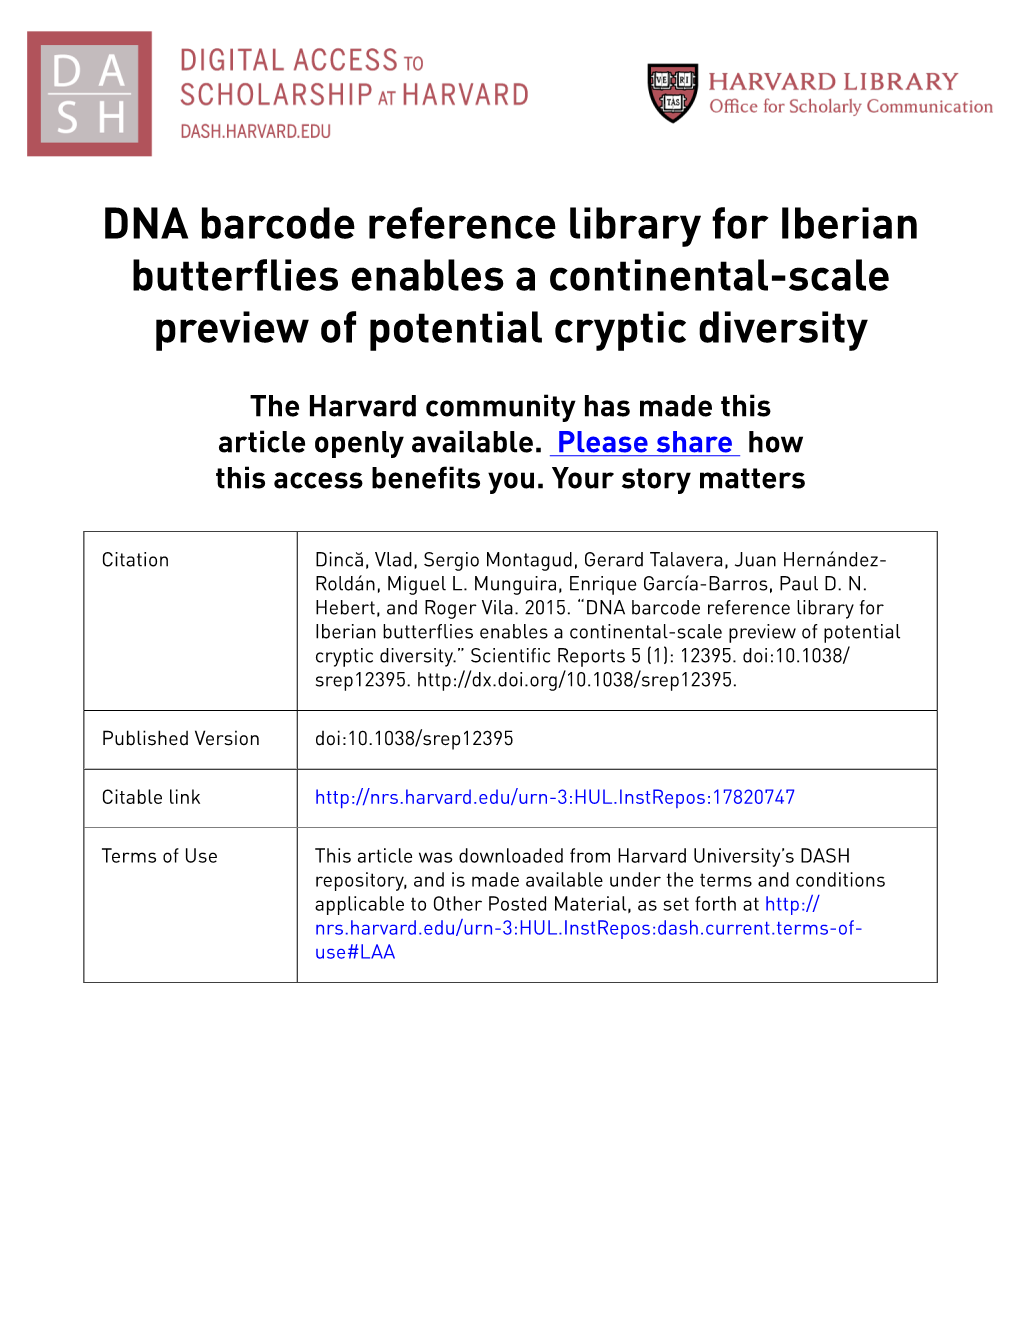 DNA Barcode Reference Library for Iberian Butterflies Enables a Continental-Scale Preview of Potential Cryptic Diversity